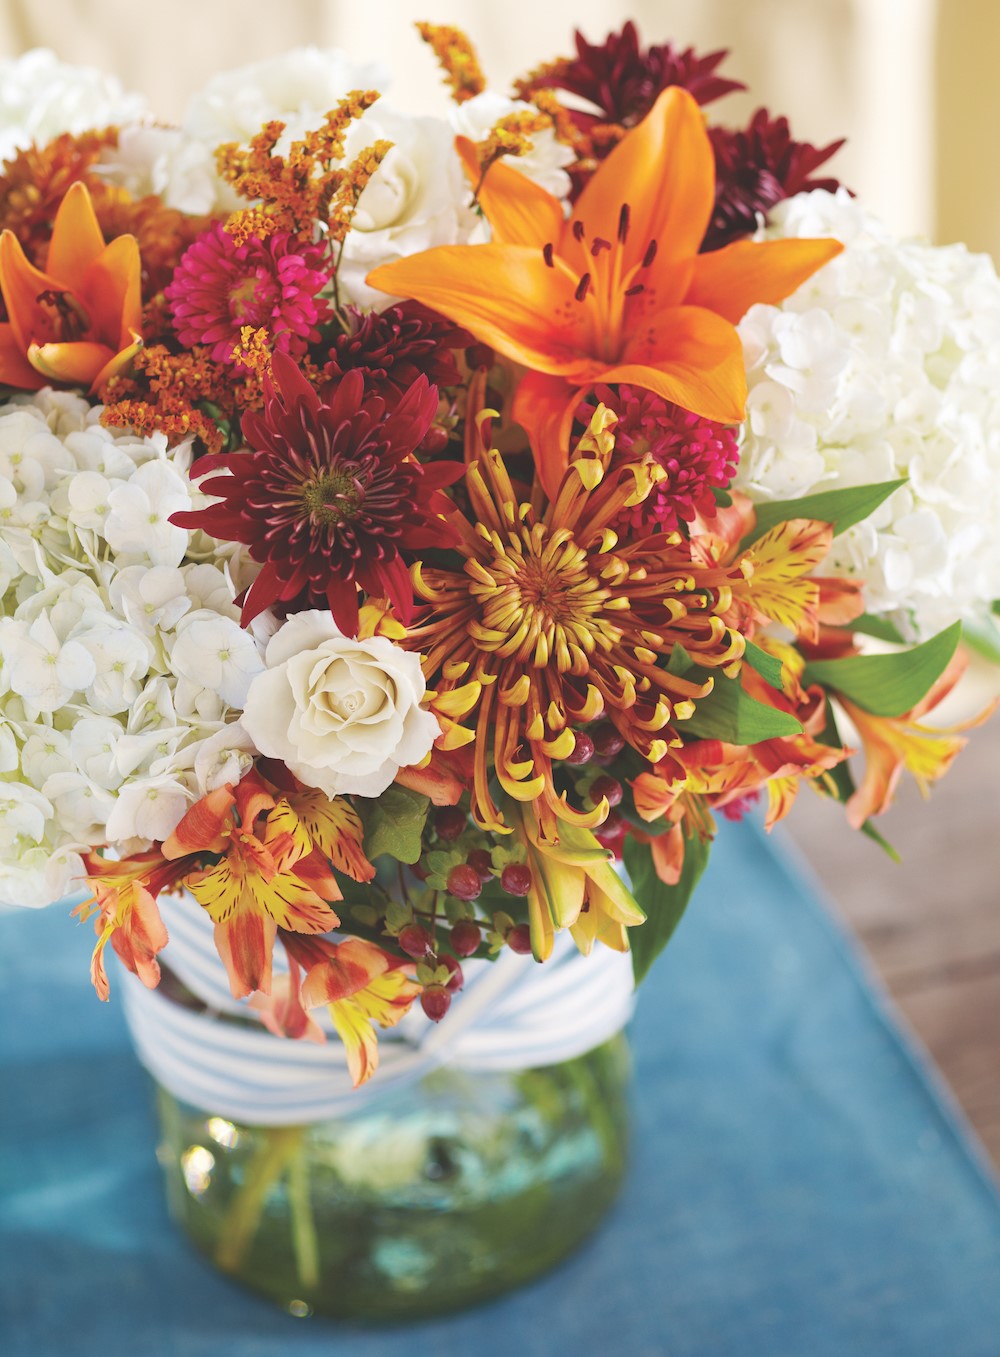 Arrangement of lillies, tiger lillies, hydrangeas, and red and orange mums 